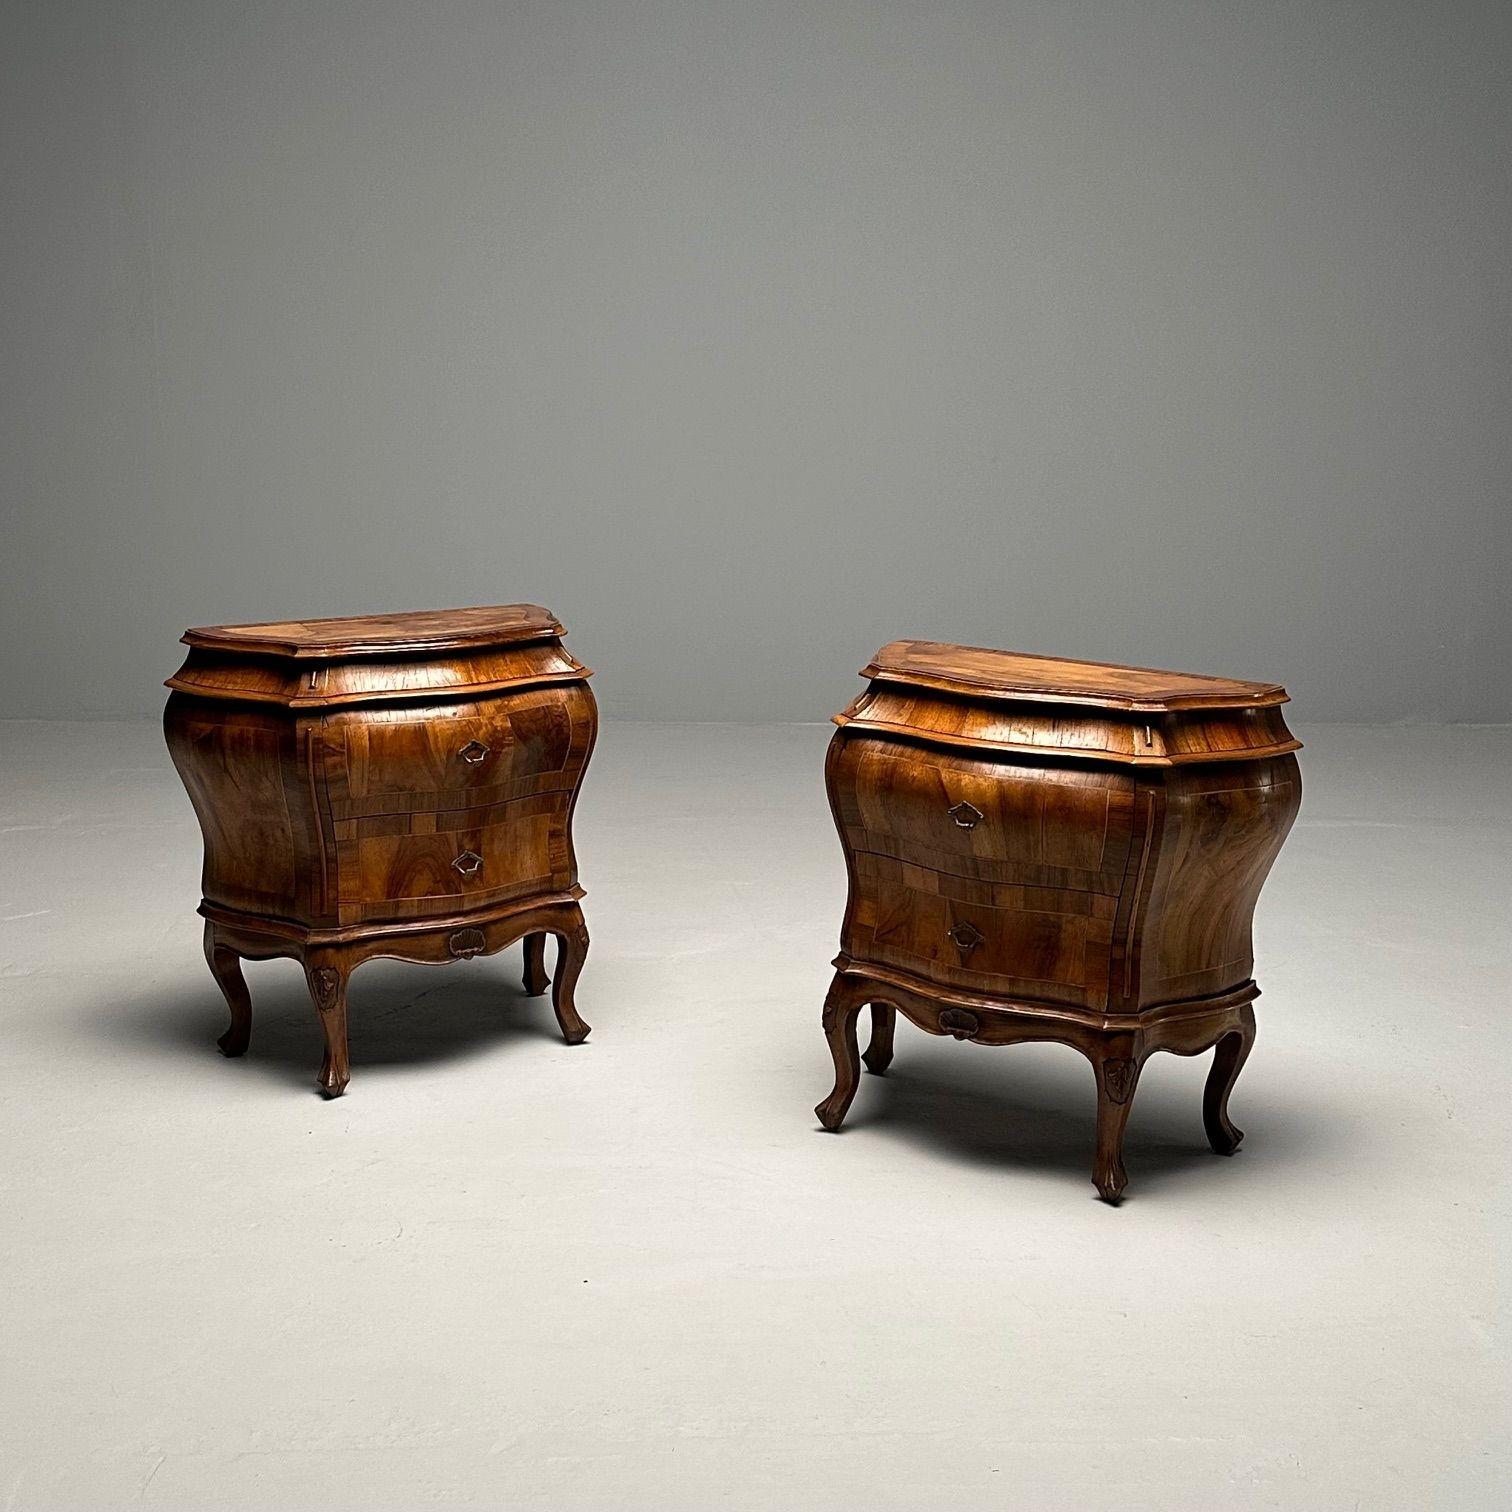 Pair of Italian Olive Wood Commodes, Nightstands, End Tables or Pedestals, Baroque Style

Each having two drawers of bombe form. Labeled ITALY. Both having minor veneer issues consistent with pricing.

Height: 26.25 Width: 26 Depth: 12.25